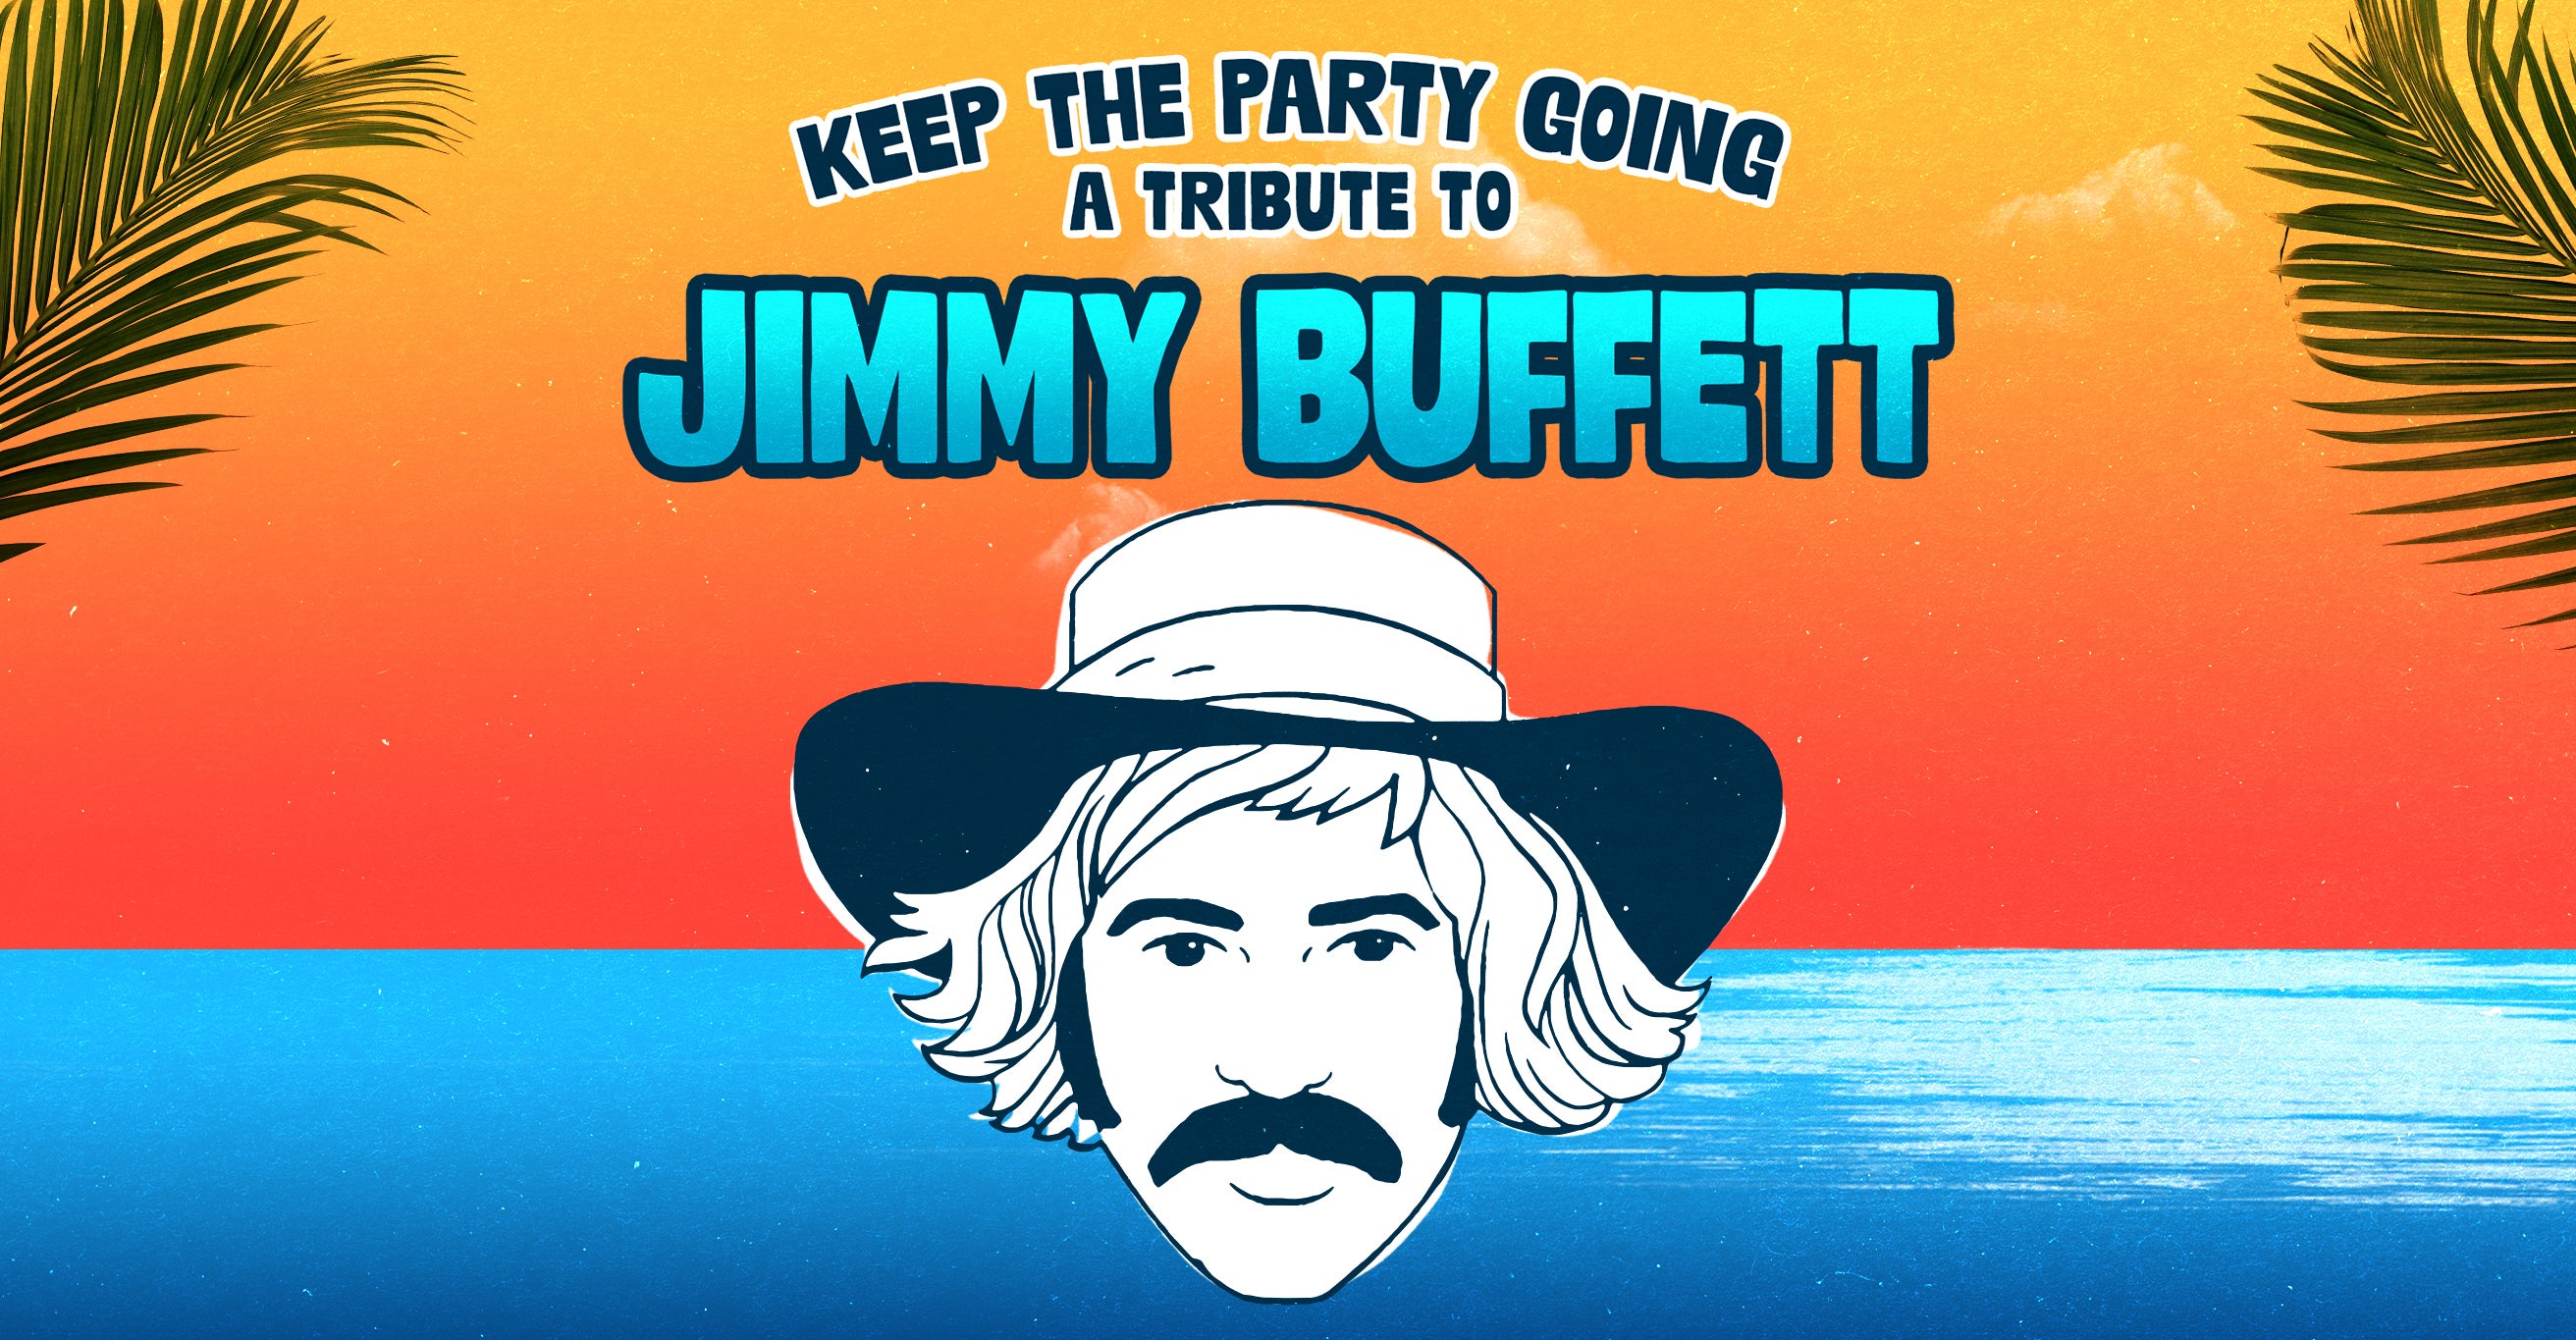 Keep the Party Going: A Tribute to Jimmy Buffett in Hollywood promo photo for American Express® Early Access presale offer code